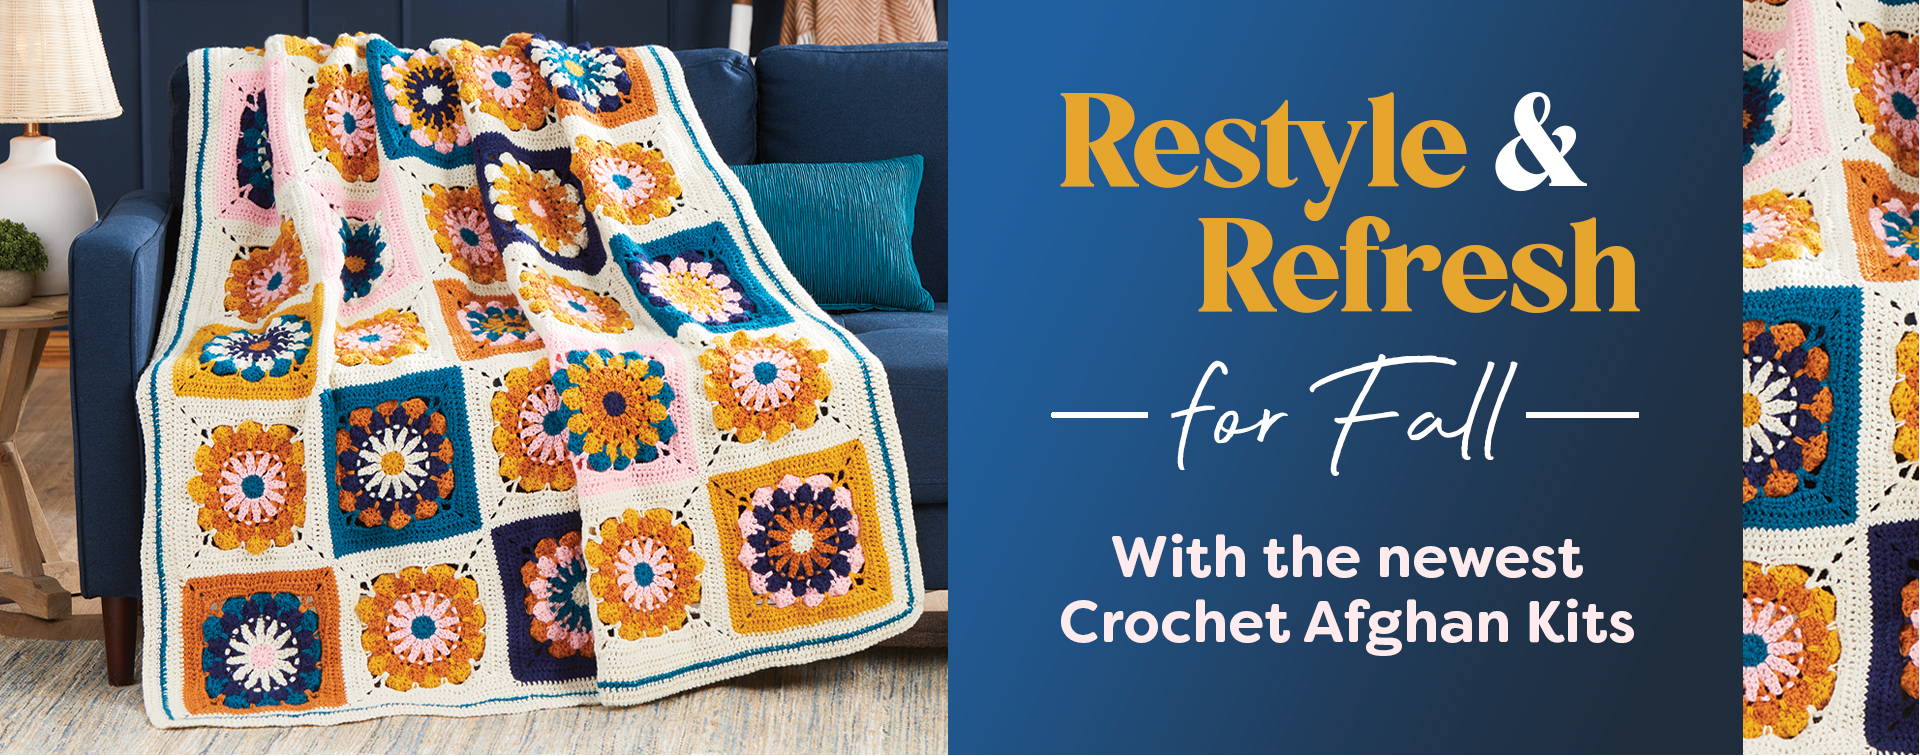 Restyle & Refresh for Fall with the newest Crochet Afghan Kits